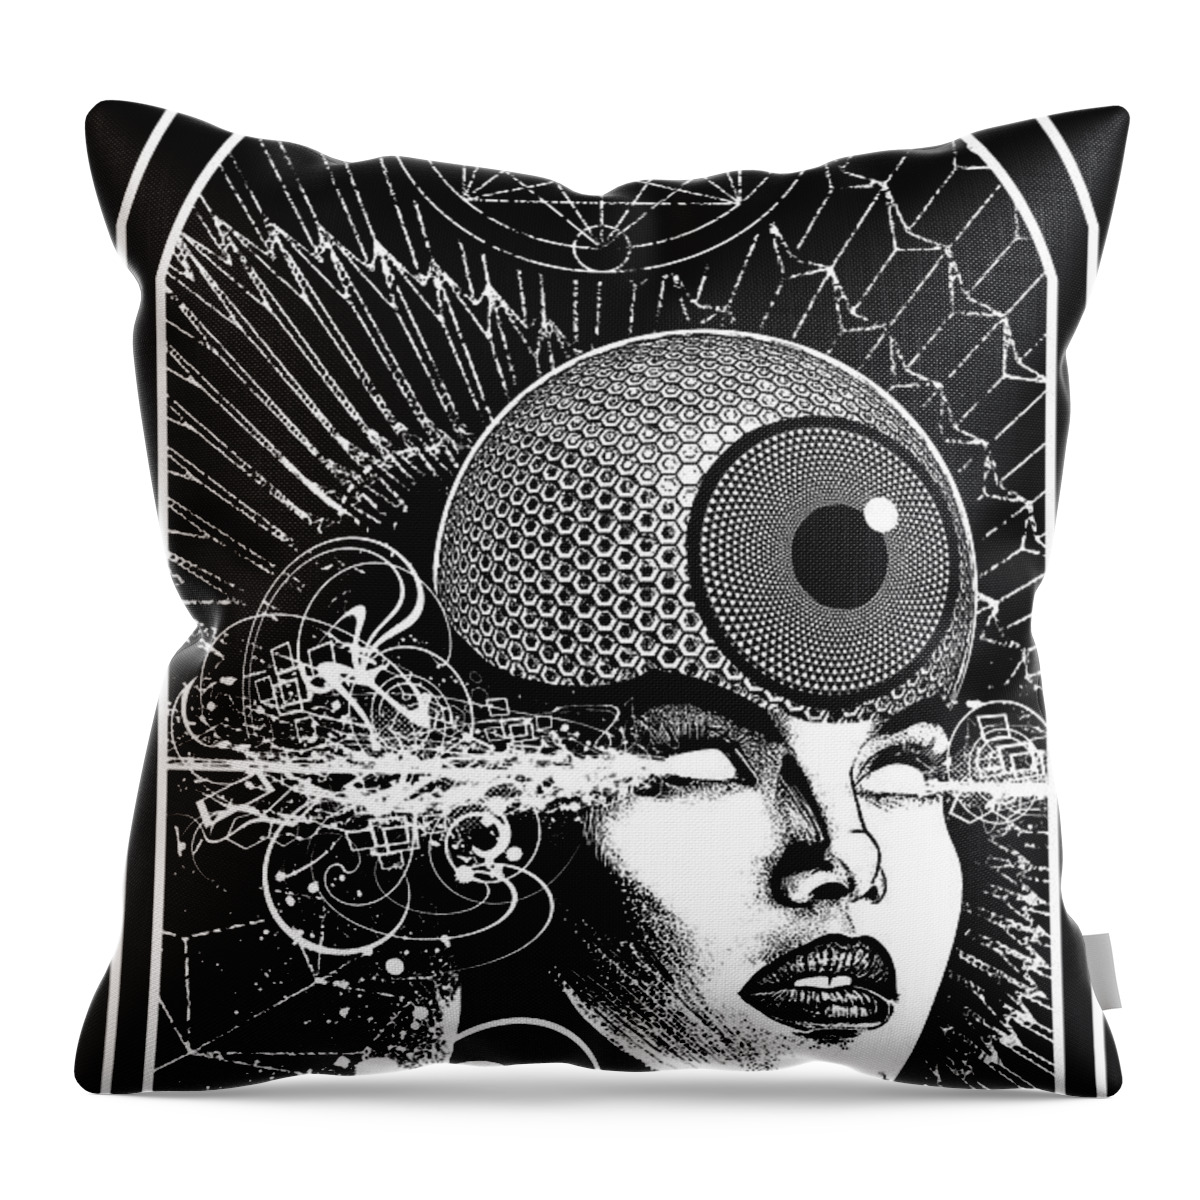 3rd Eye Throw Pillow featuring the mixed media Unseen Sights by Tony Koehl